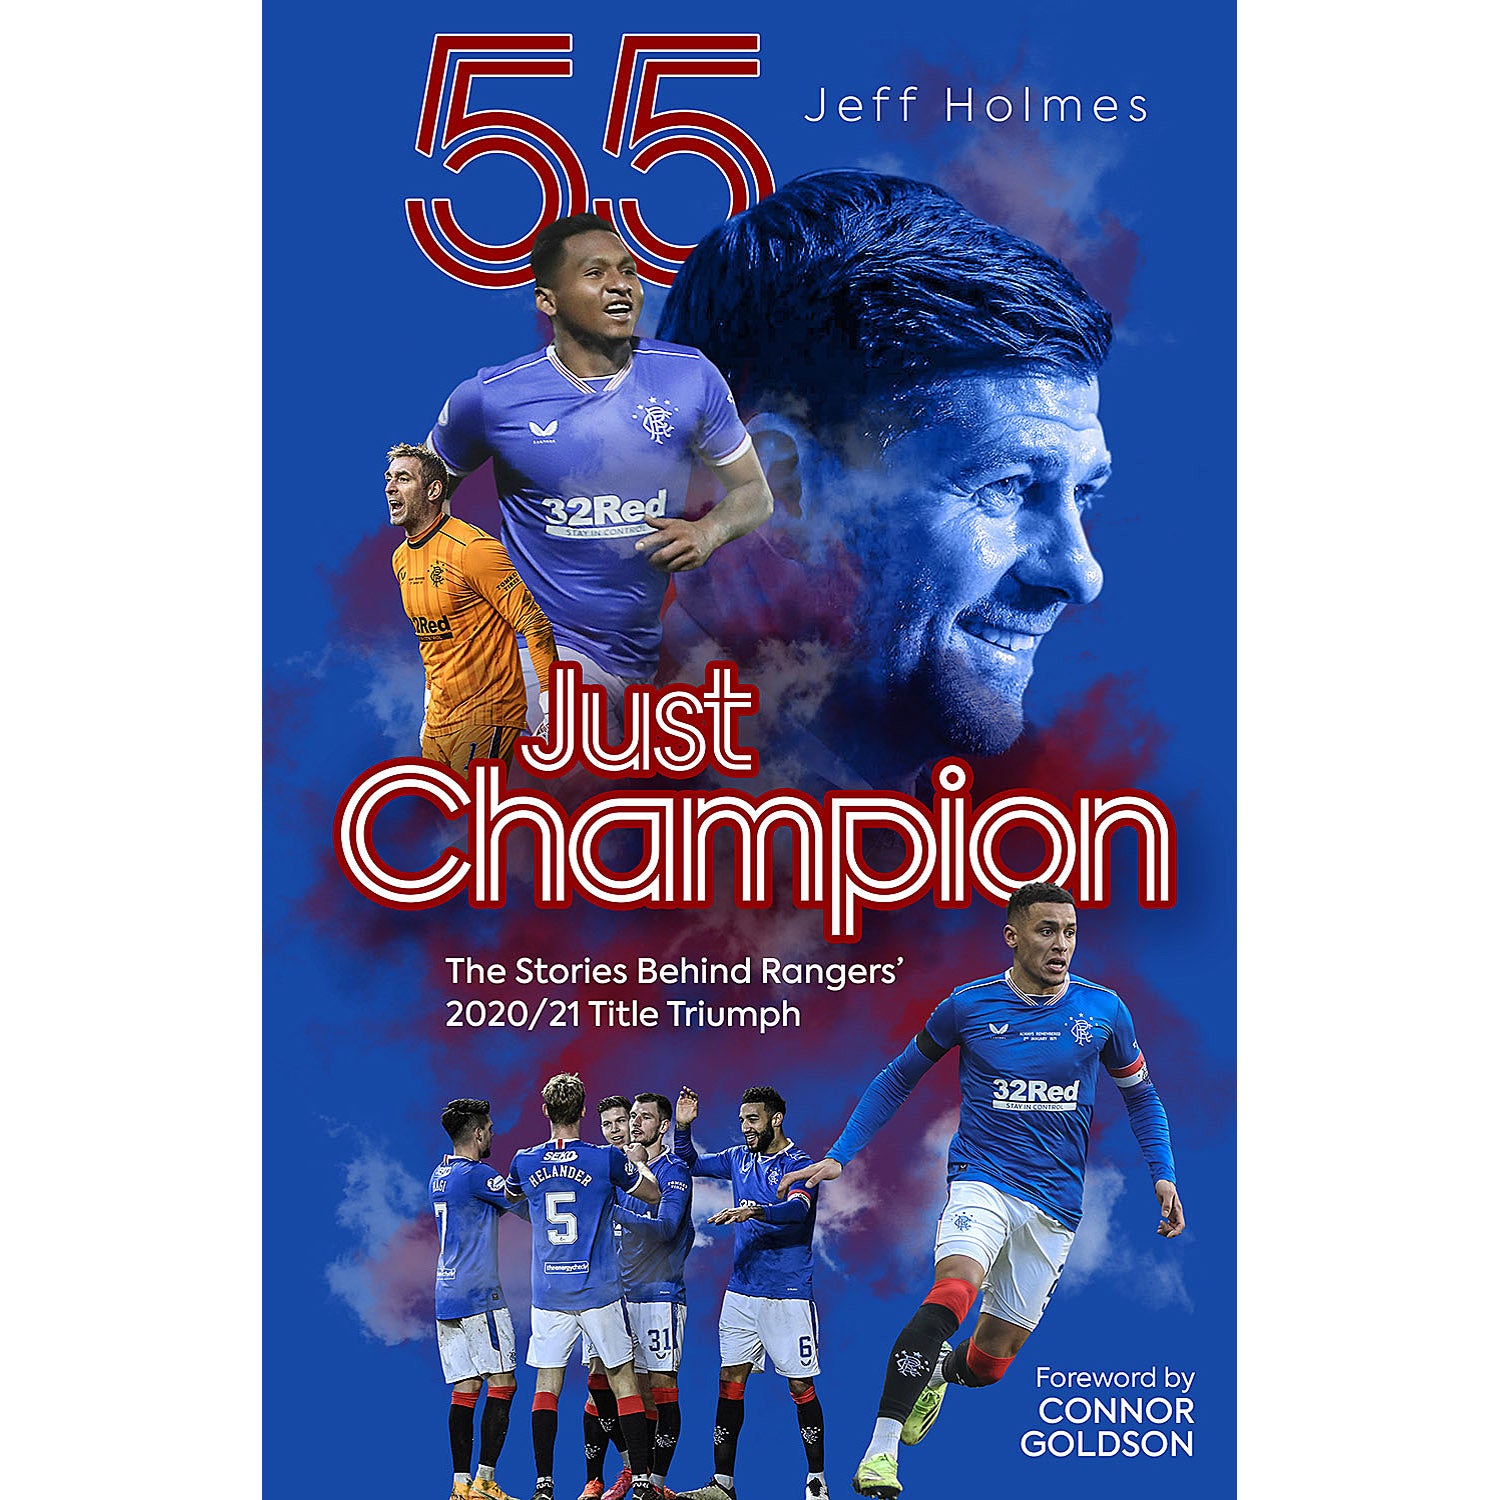 Just Champion – The Stories Behind Rangers' 2020/21 Title Triumph